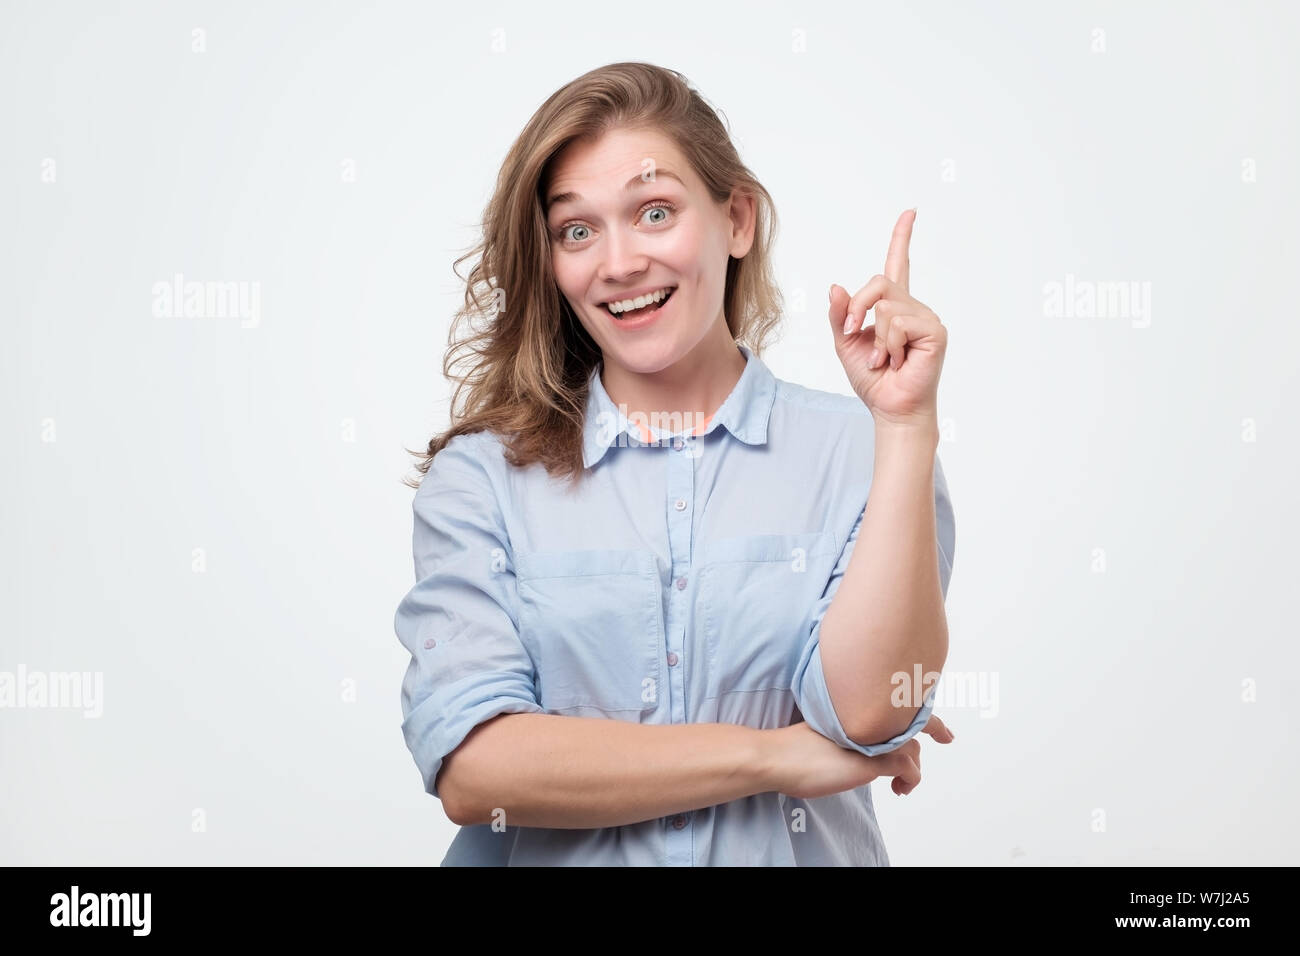 Cheerful young woman holding her index finger up Stock Photo